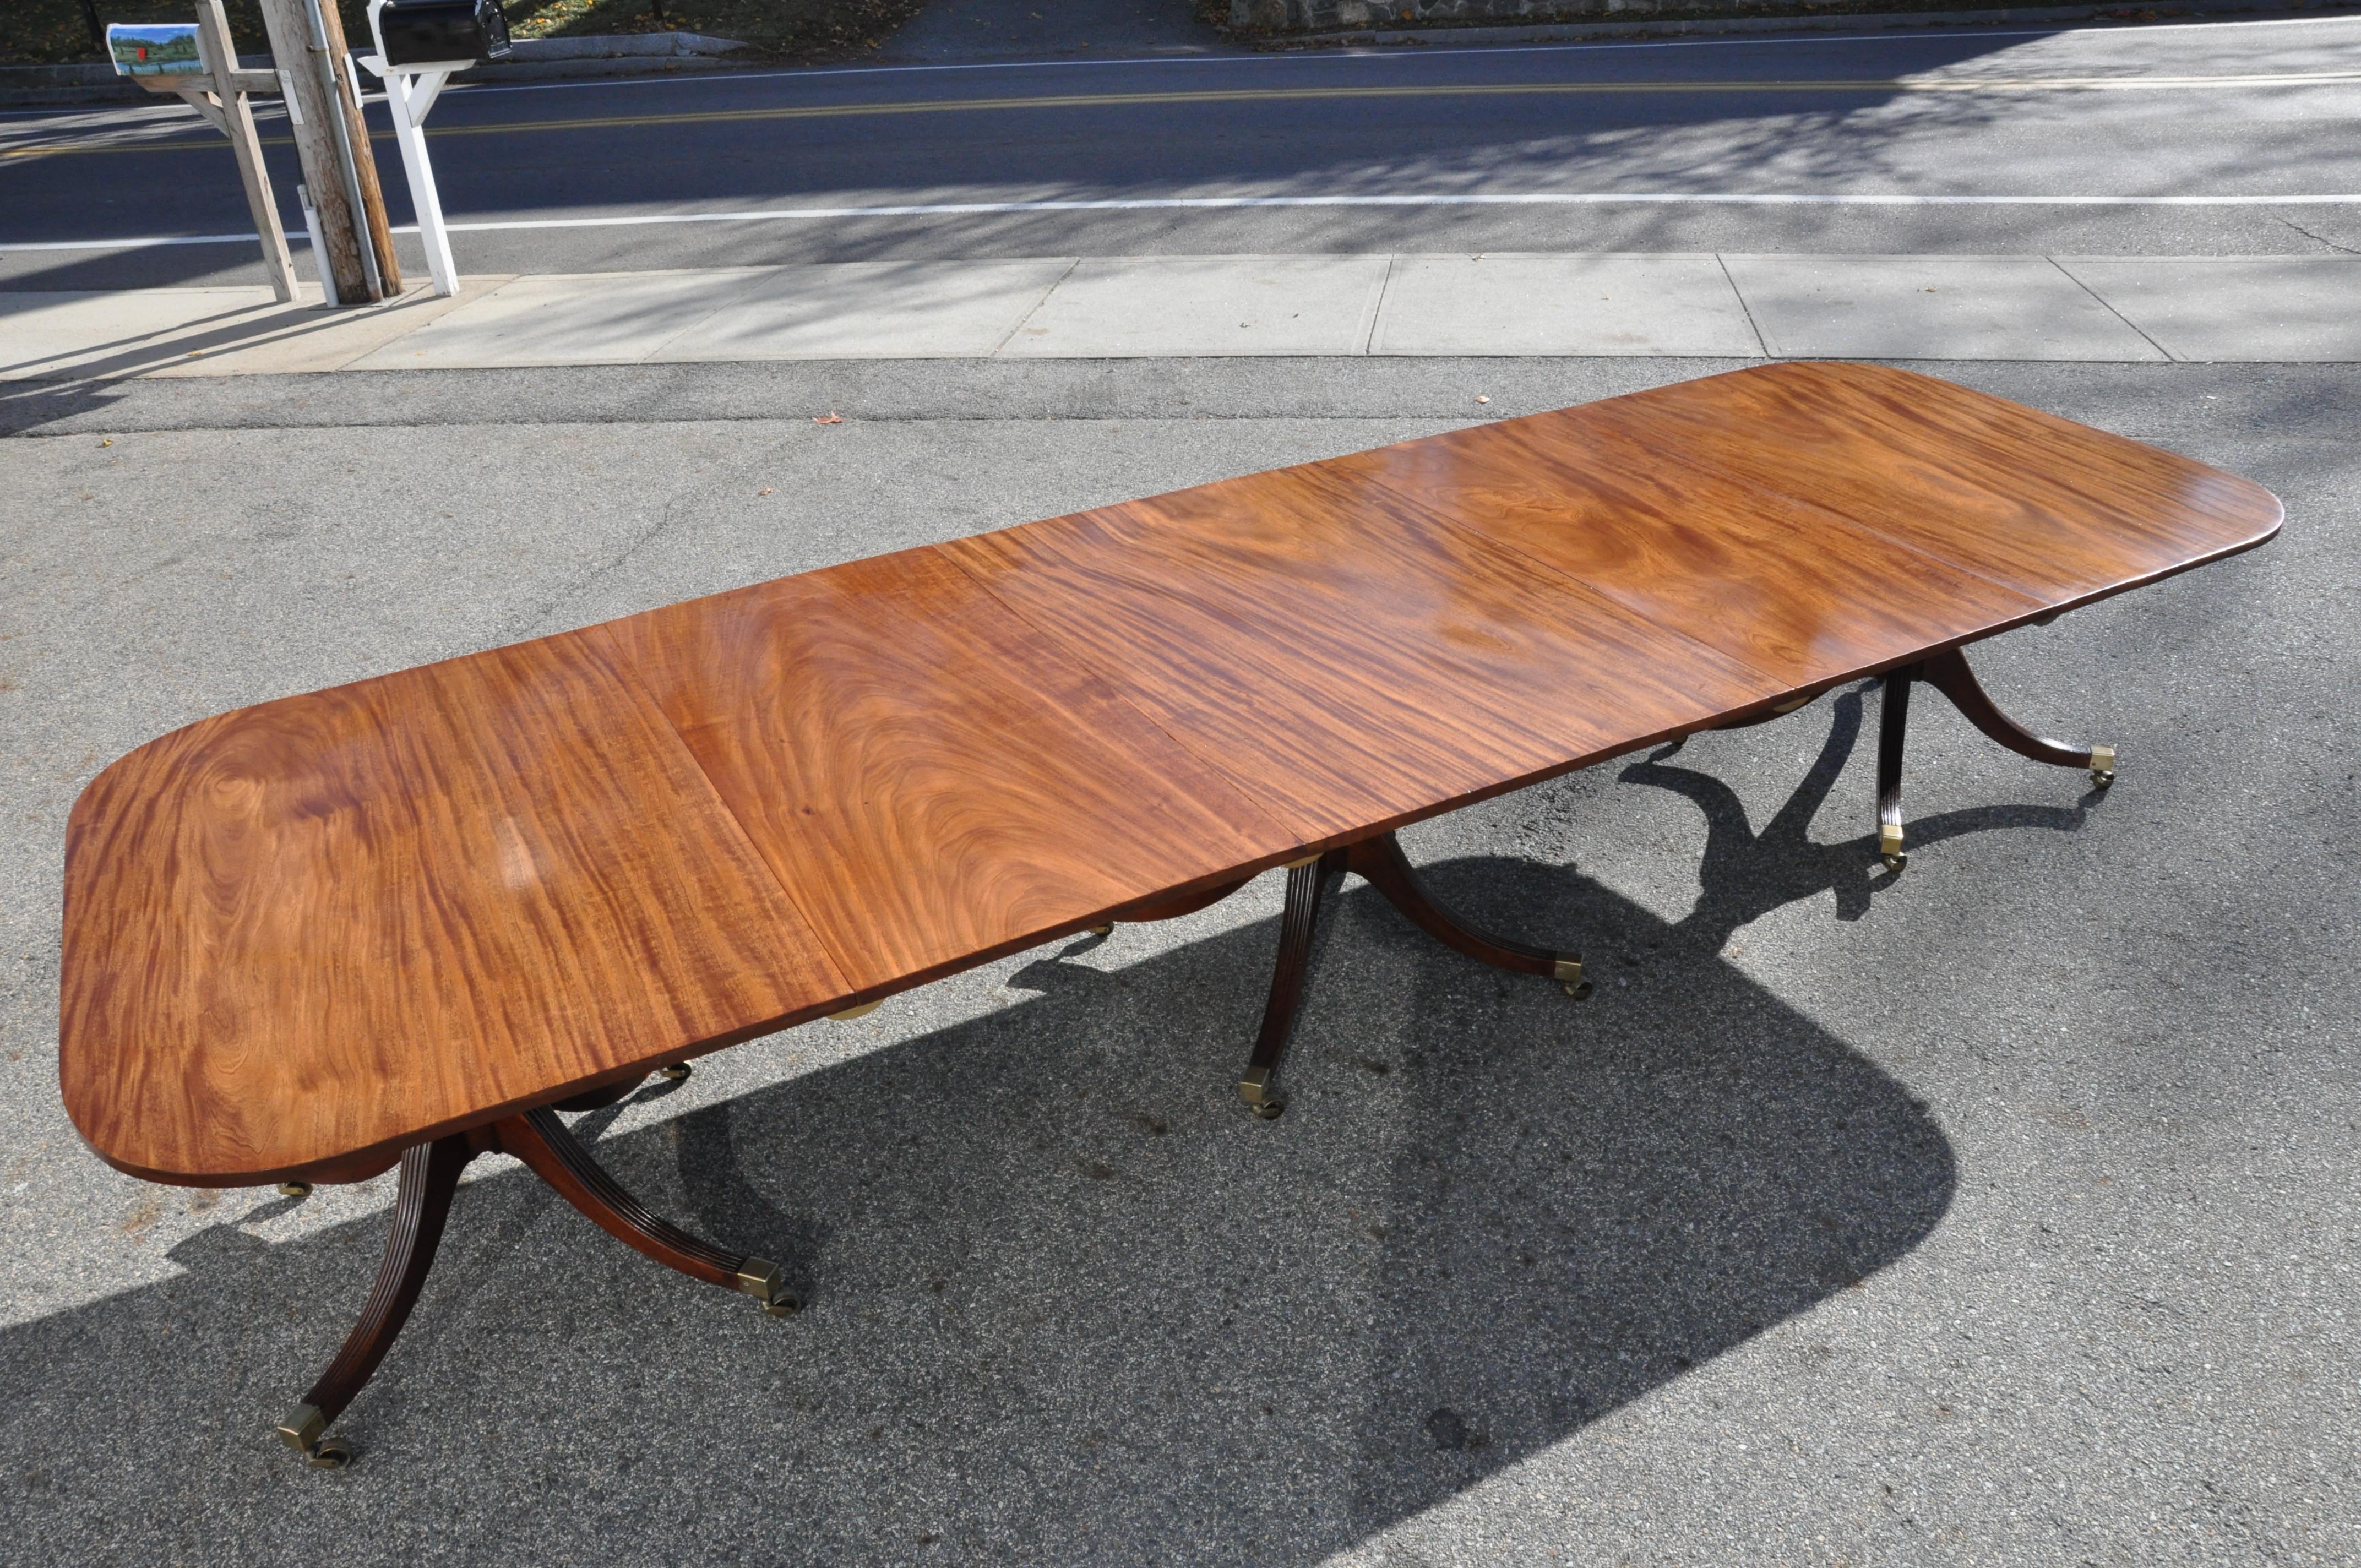 Well figured Cuban mahogany period dining table with original leaves. Three tip top pedestals and two leaves. The very best of solid, bookmatched mahogany. Wonderful condition, patina and finish

Closed: 51” x 102”
With two 24” leaves. 150” long.